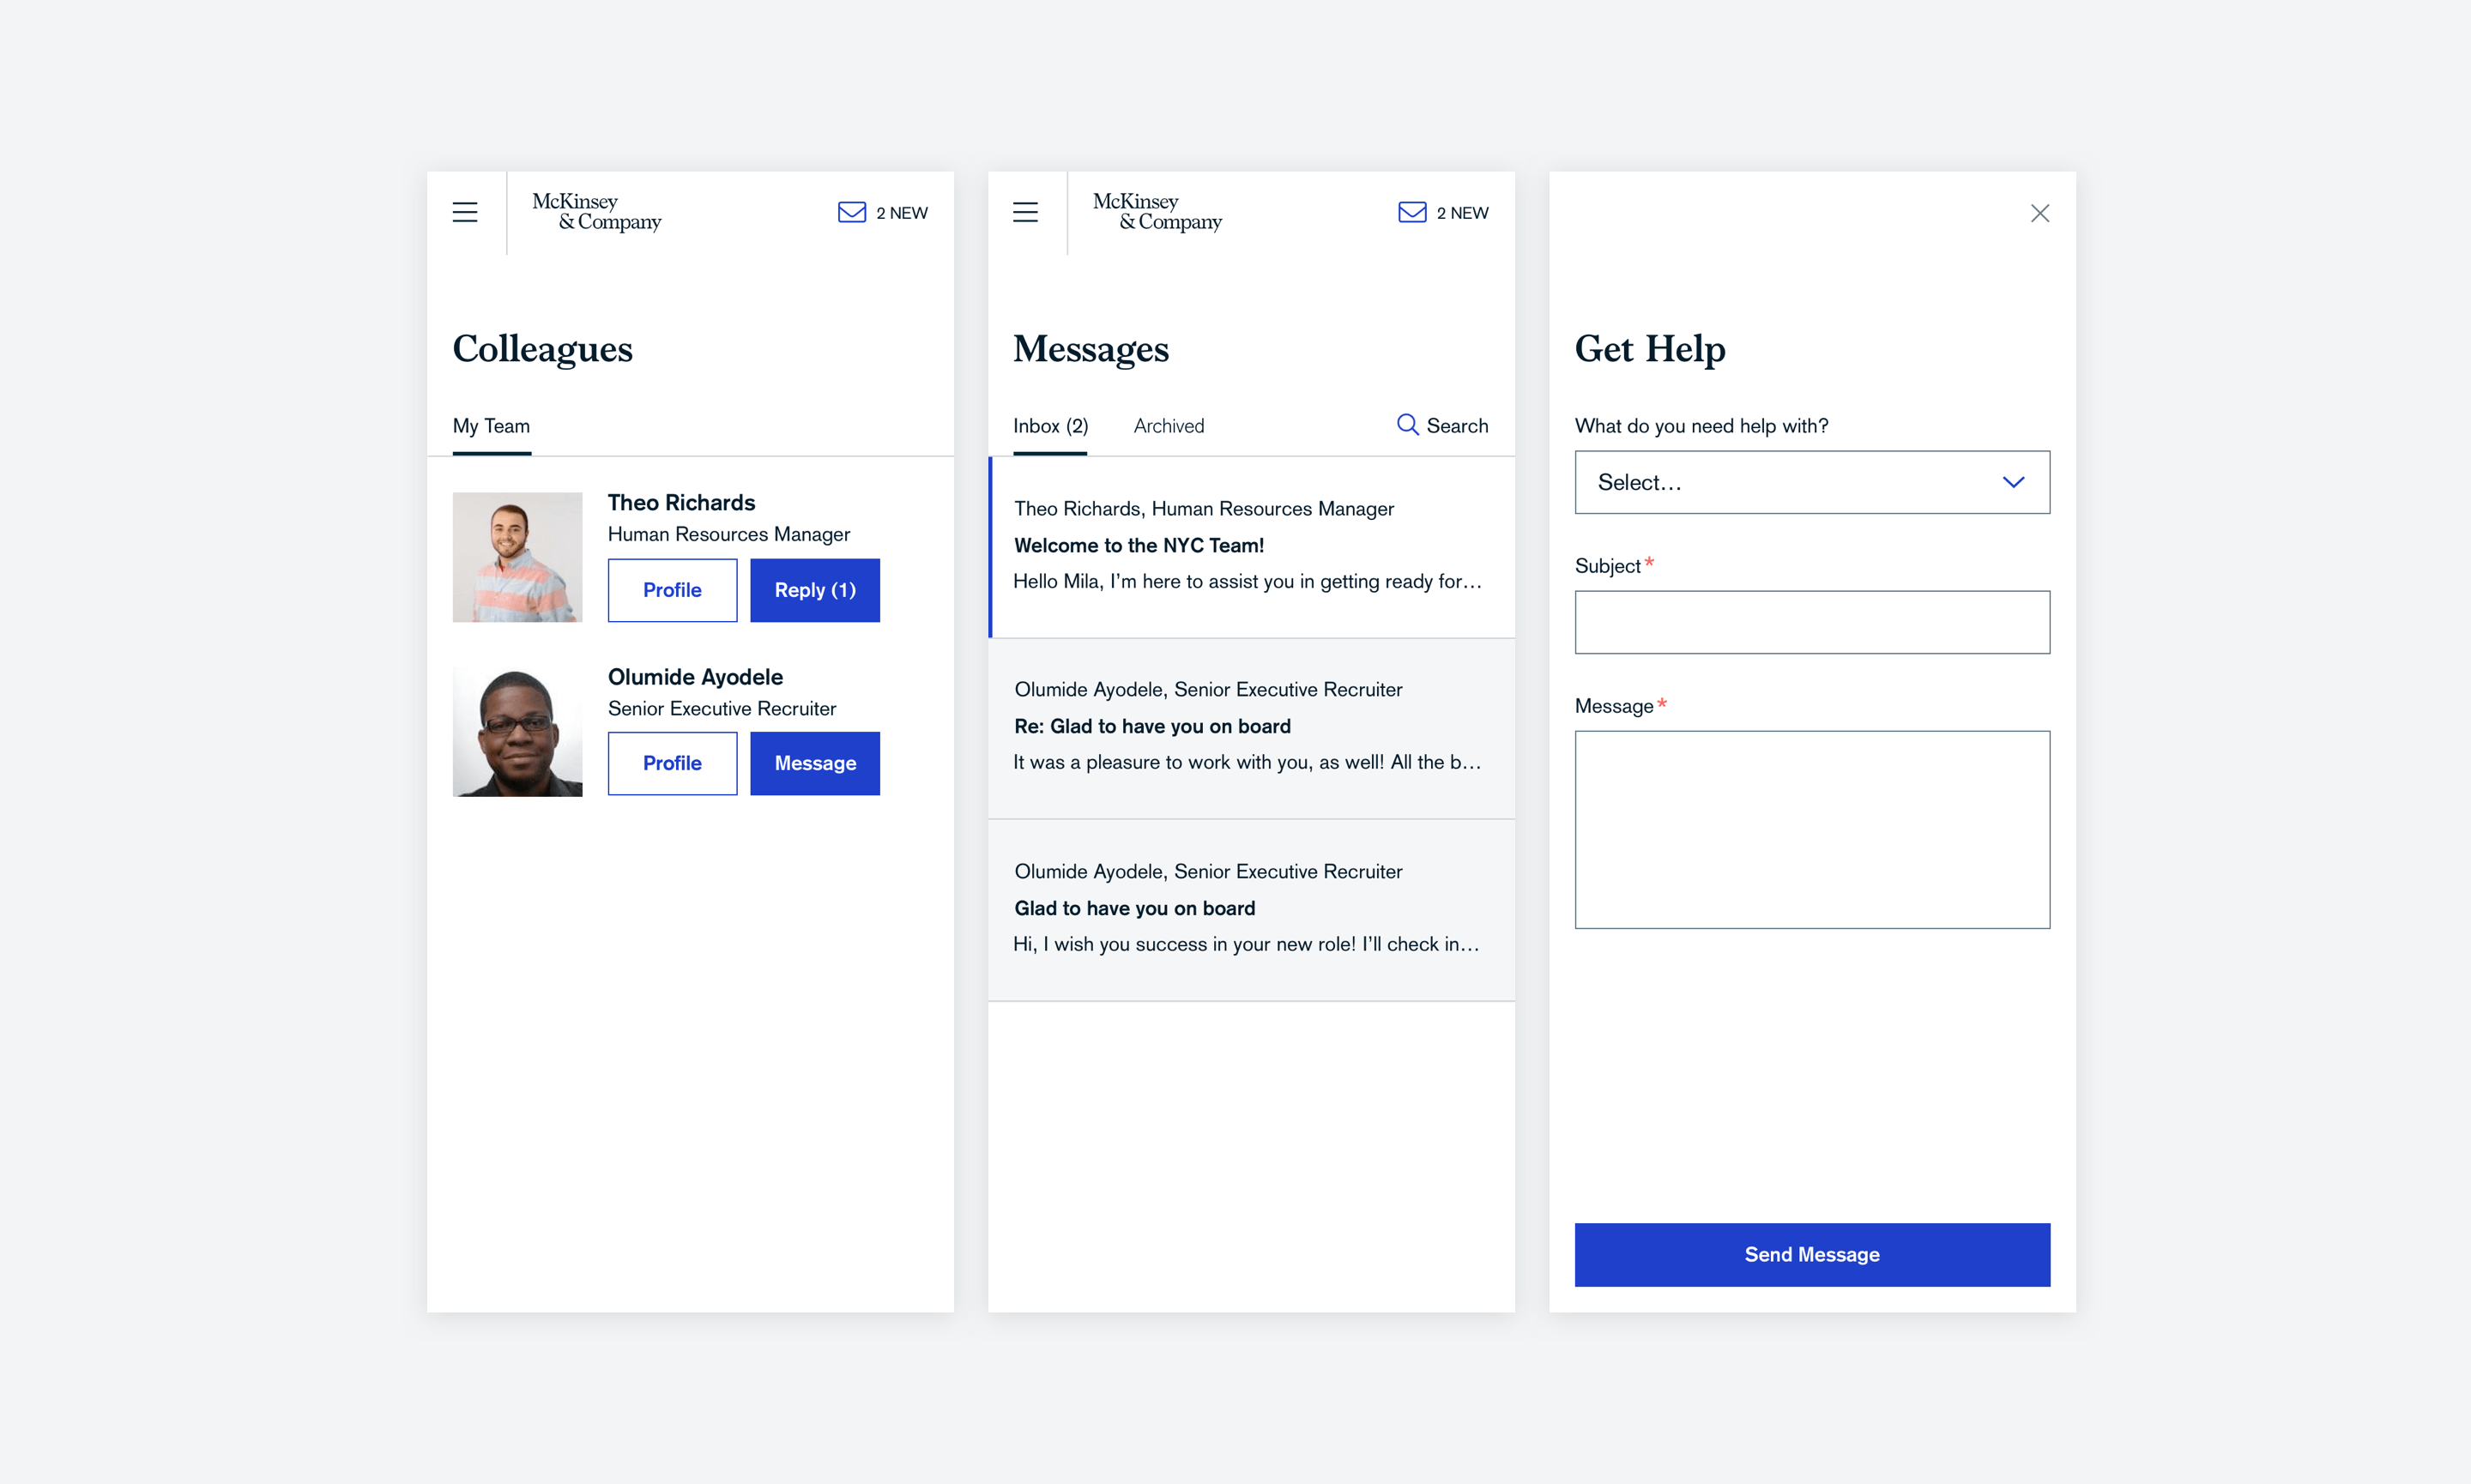 Screens shown: list of colleague profiles, options to message them, the messages inbox, and a form to get help